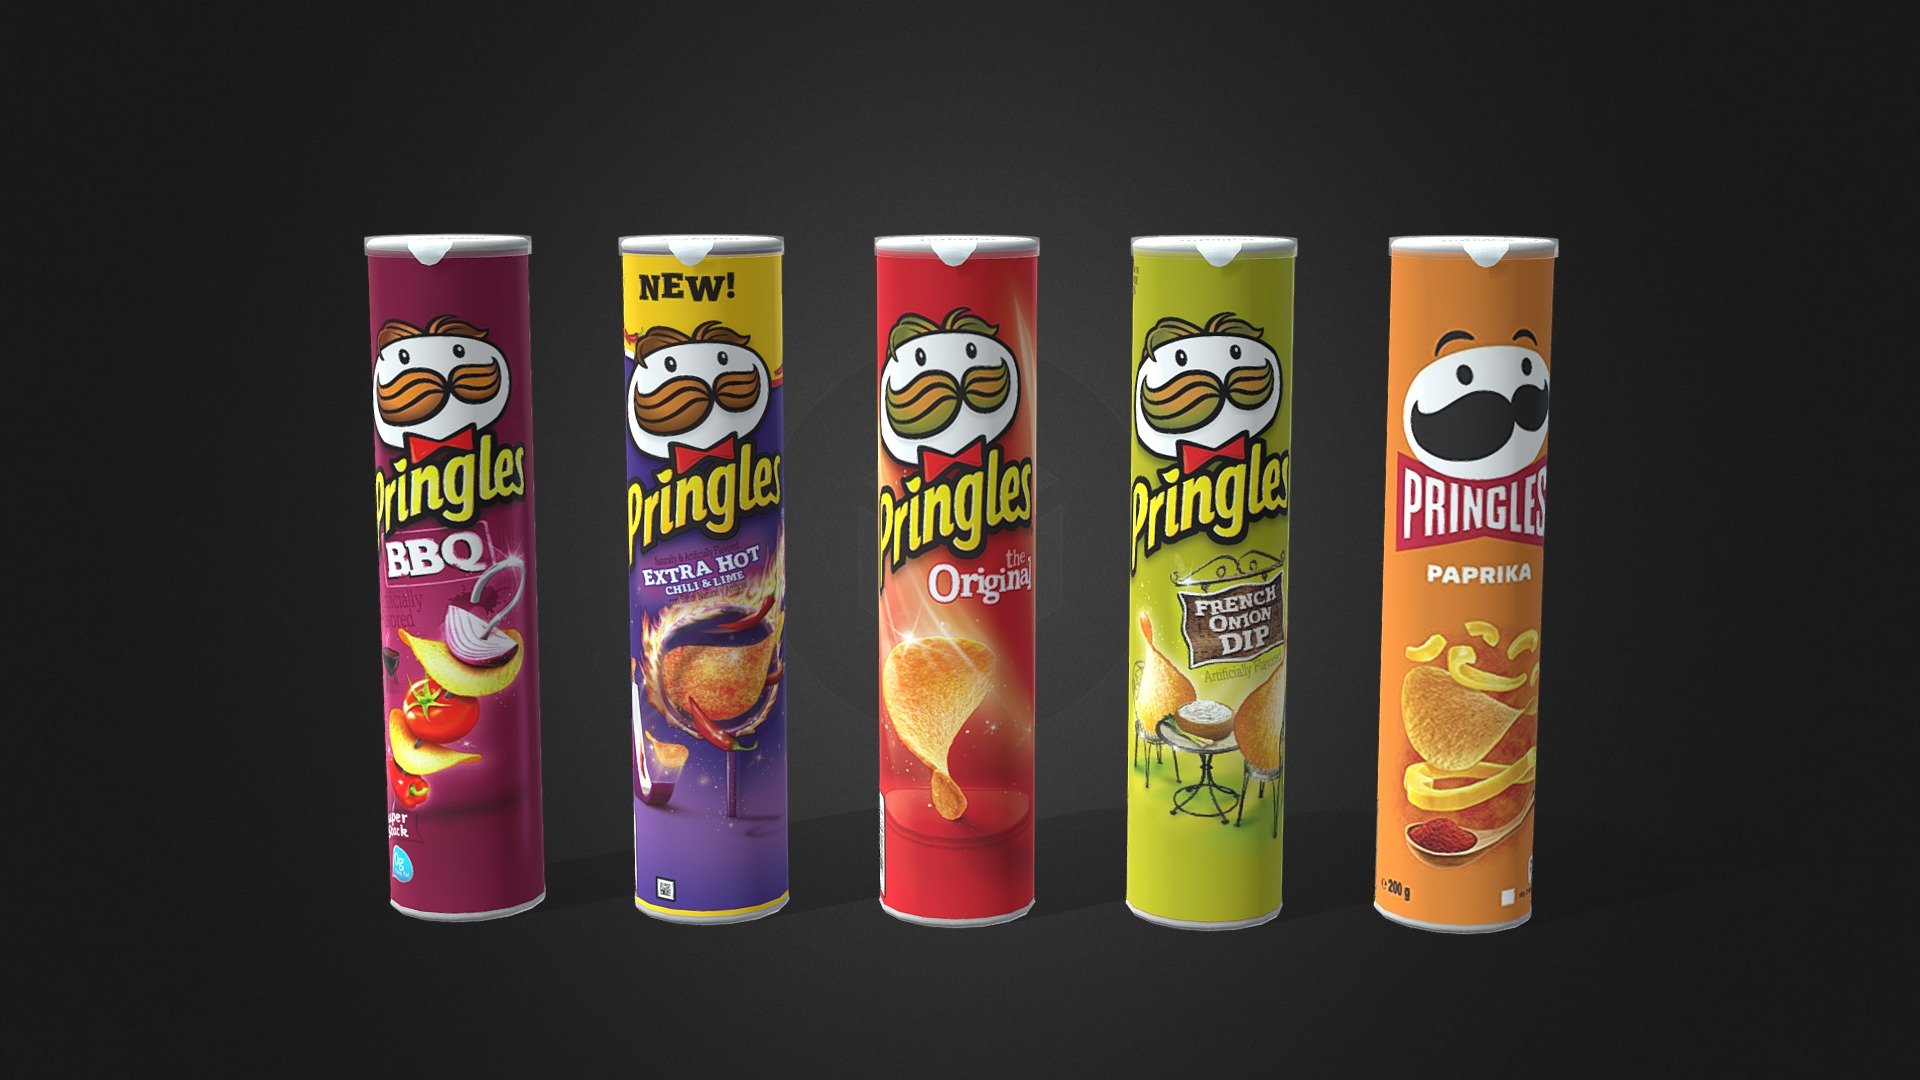 Multiple Pringle Cans Model



Pringles Original

Pringles BBQ

Pringles Extra Hot Chili &amp; Lime

Pringles FRENCH Onion Dip

Pringles Paprika



All Models are Gameready and have their original sizes.

HD Textures used for all models. 
Free Models, Downloadable, Gameready - Pringles Cans | 5 Different Flavours | GAMEREADY - Download Free 3D model by NKaap 3d model